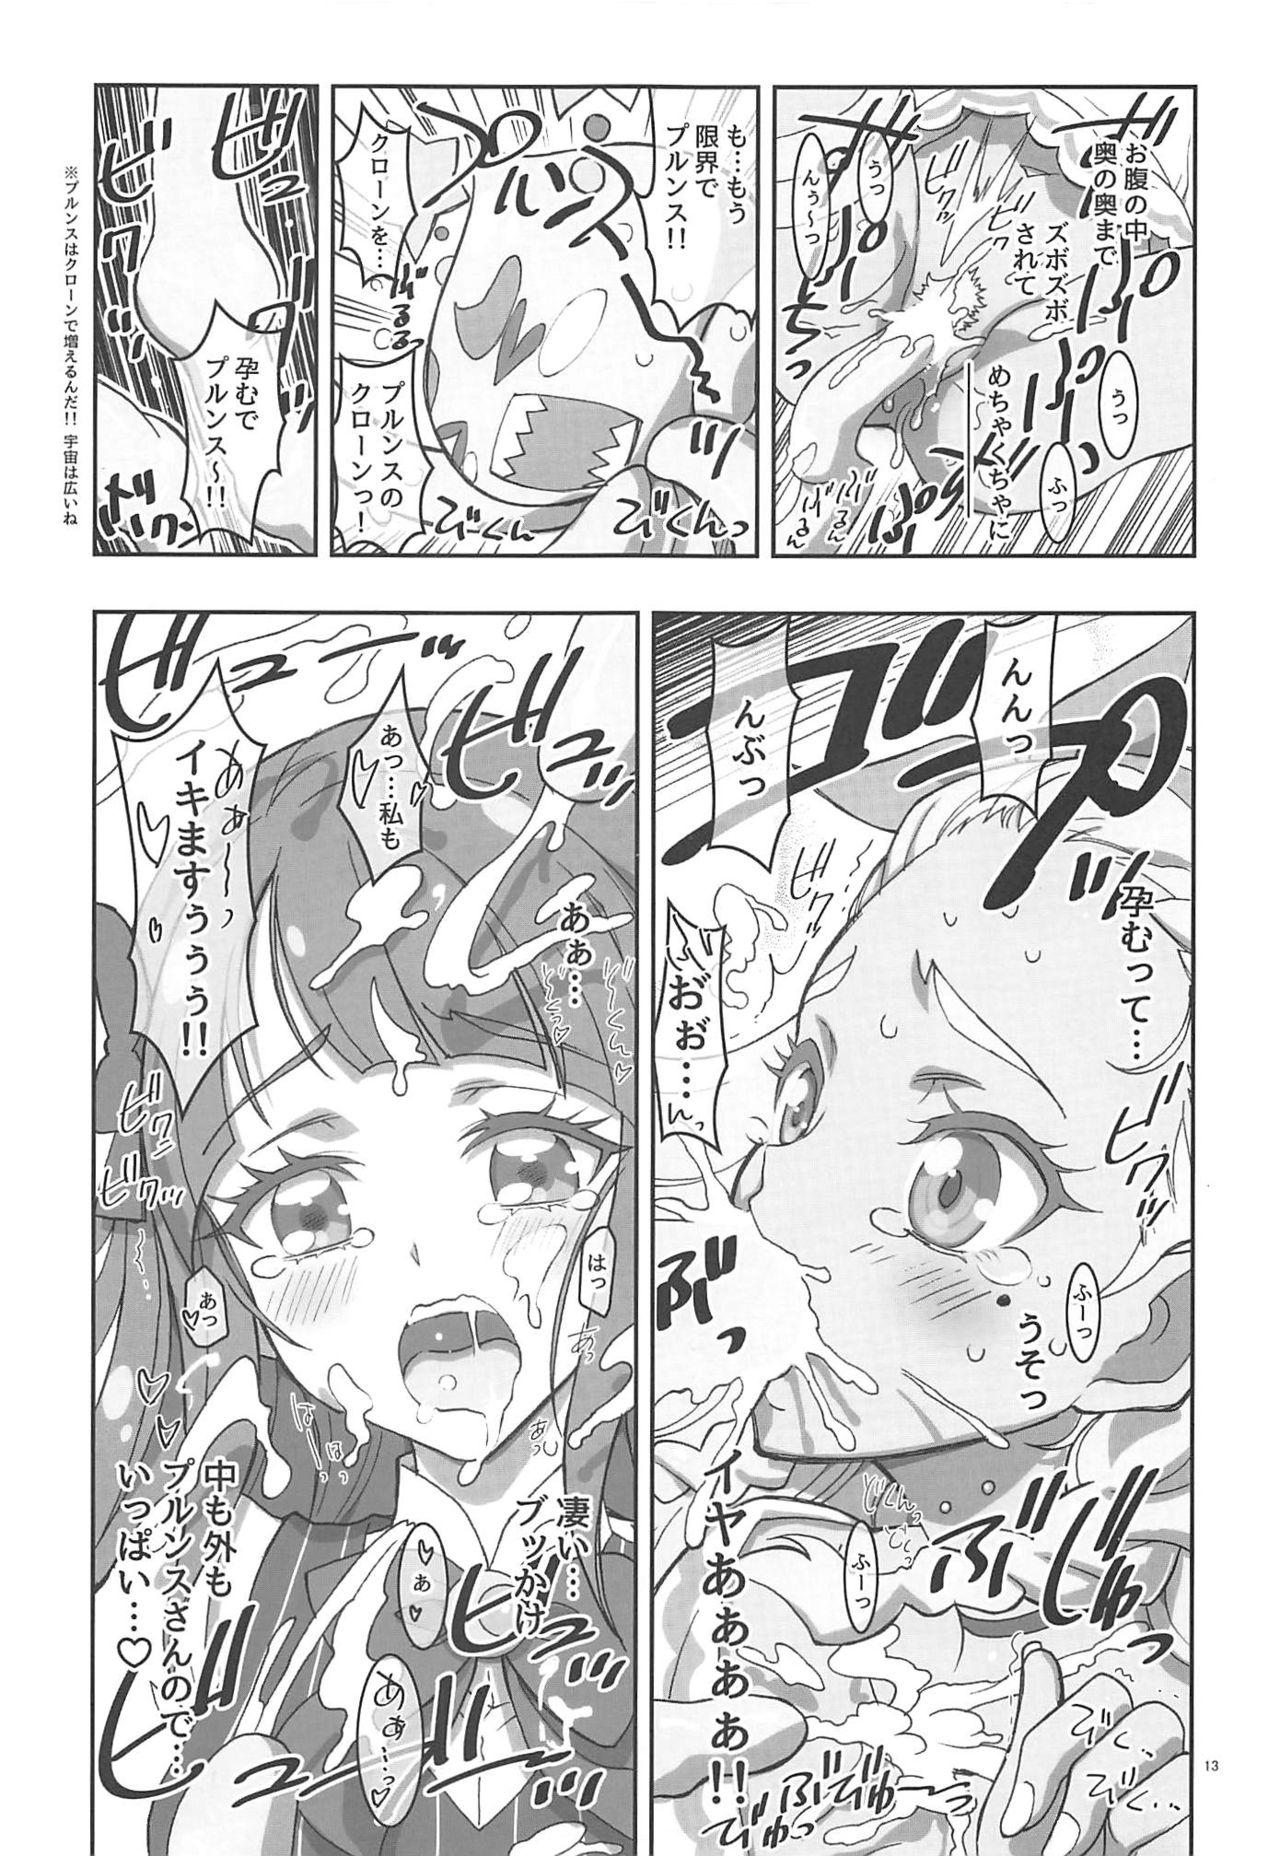 Gay Public SPACE RUN AWEY - Star twinkle precure Exposed - Page 12